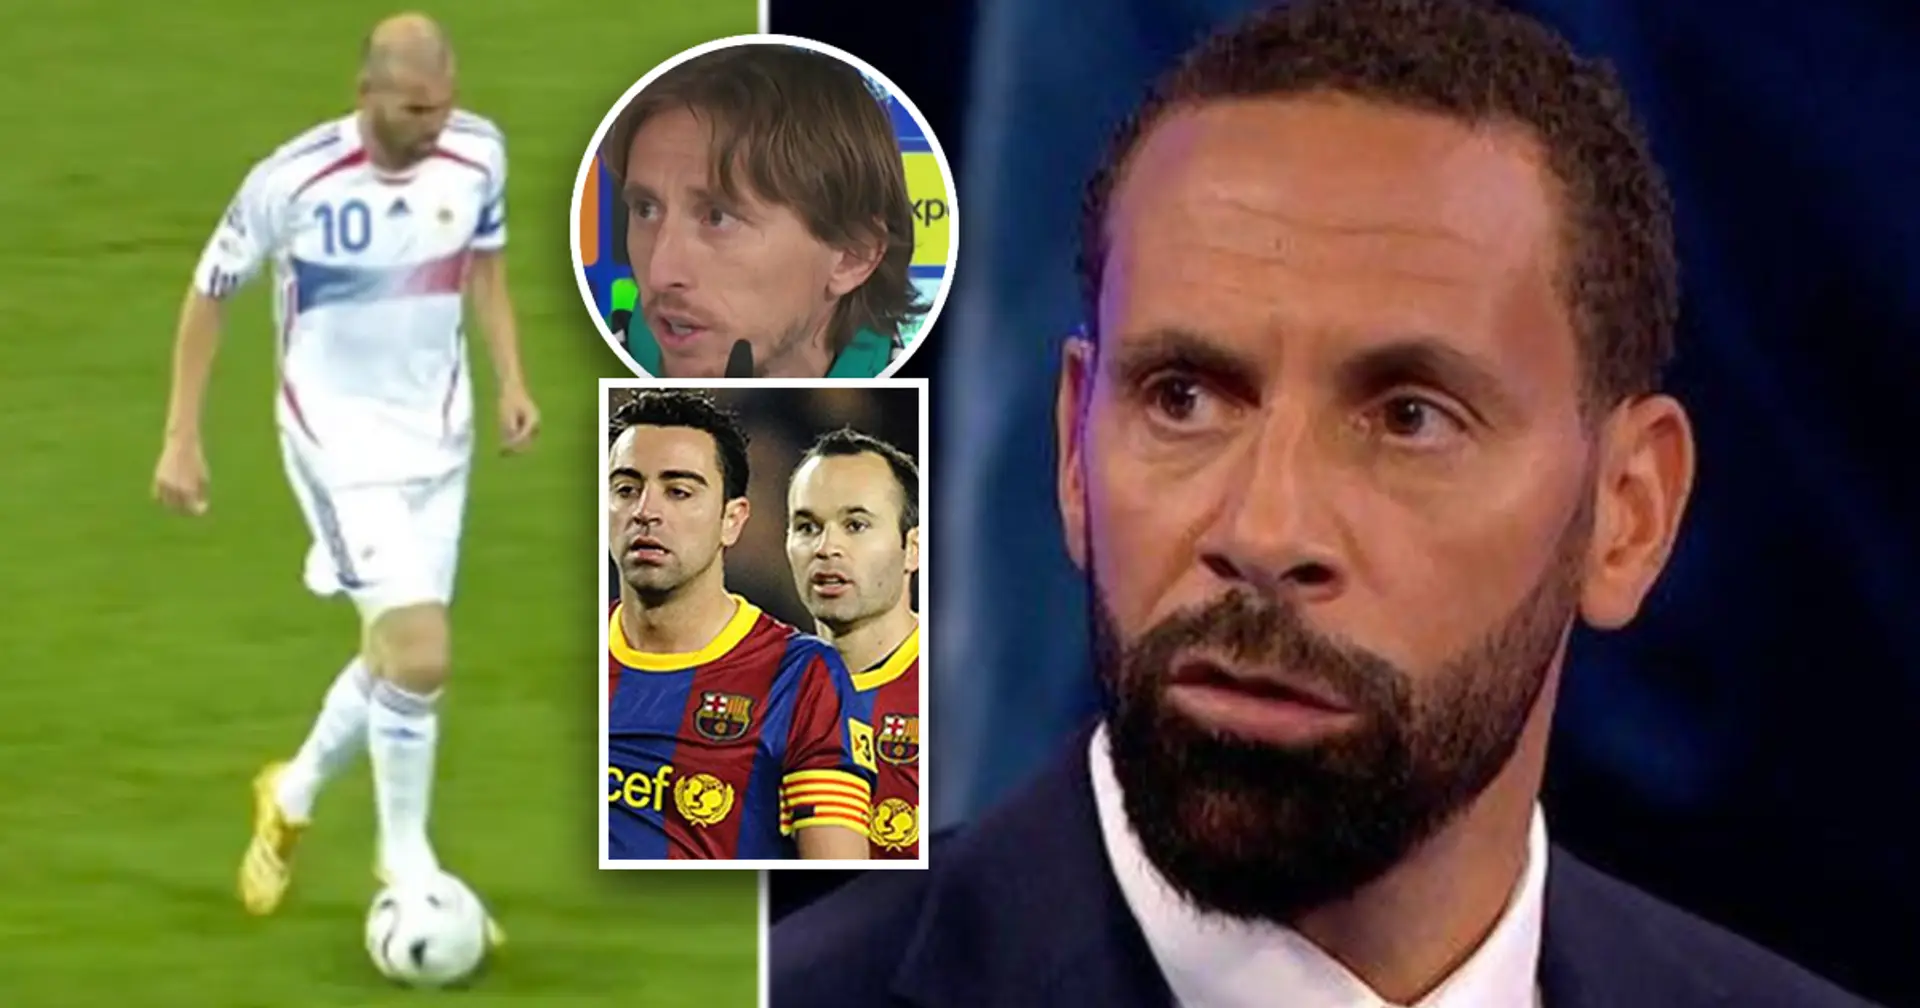 Rio Ferdinand ranks Zidane above Xavi and Iniesta, says Modric is 'at the same table' with them